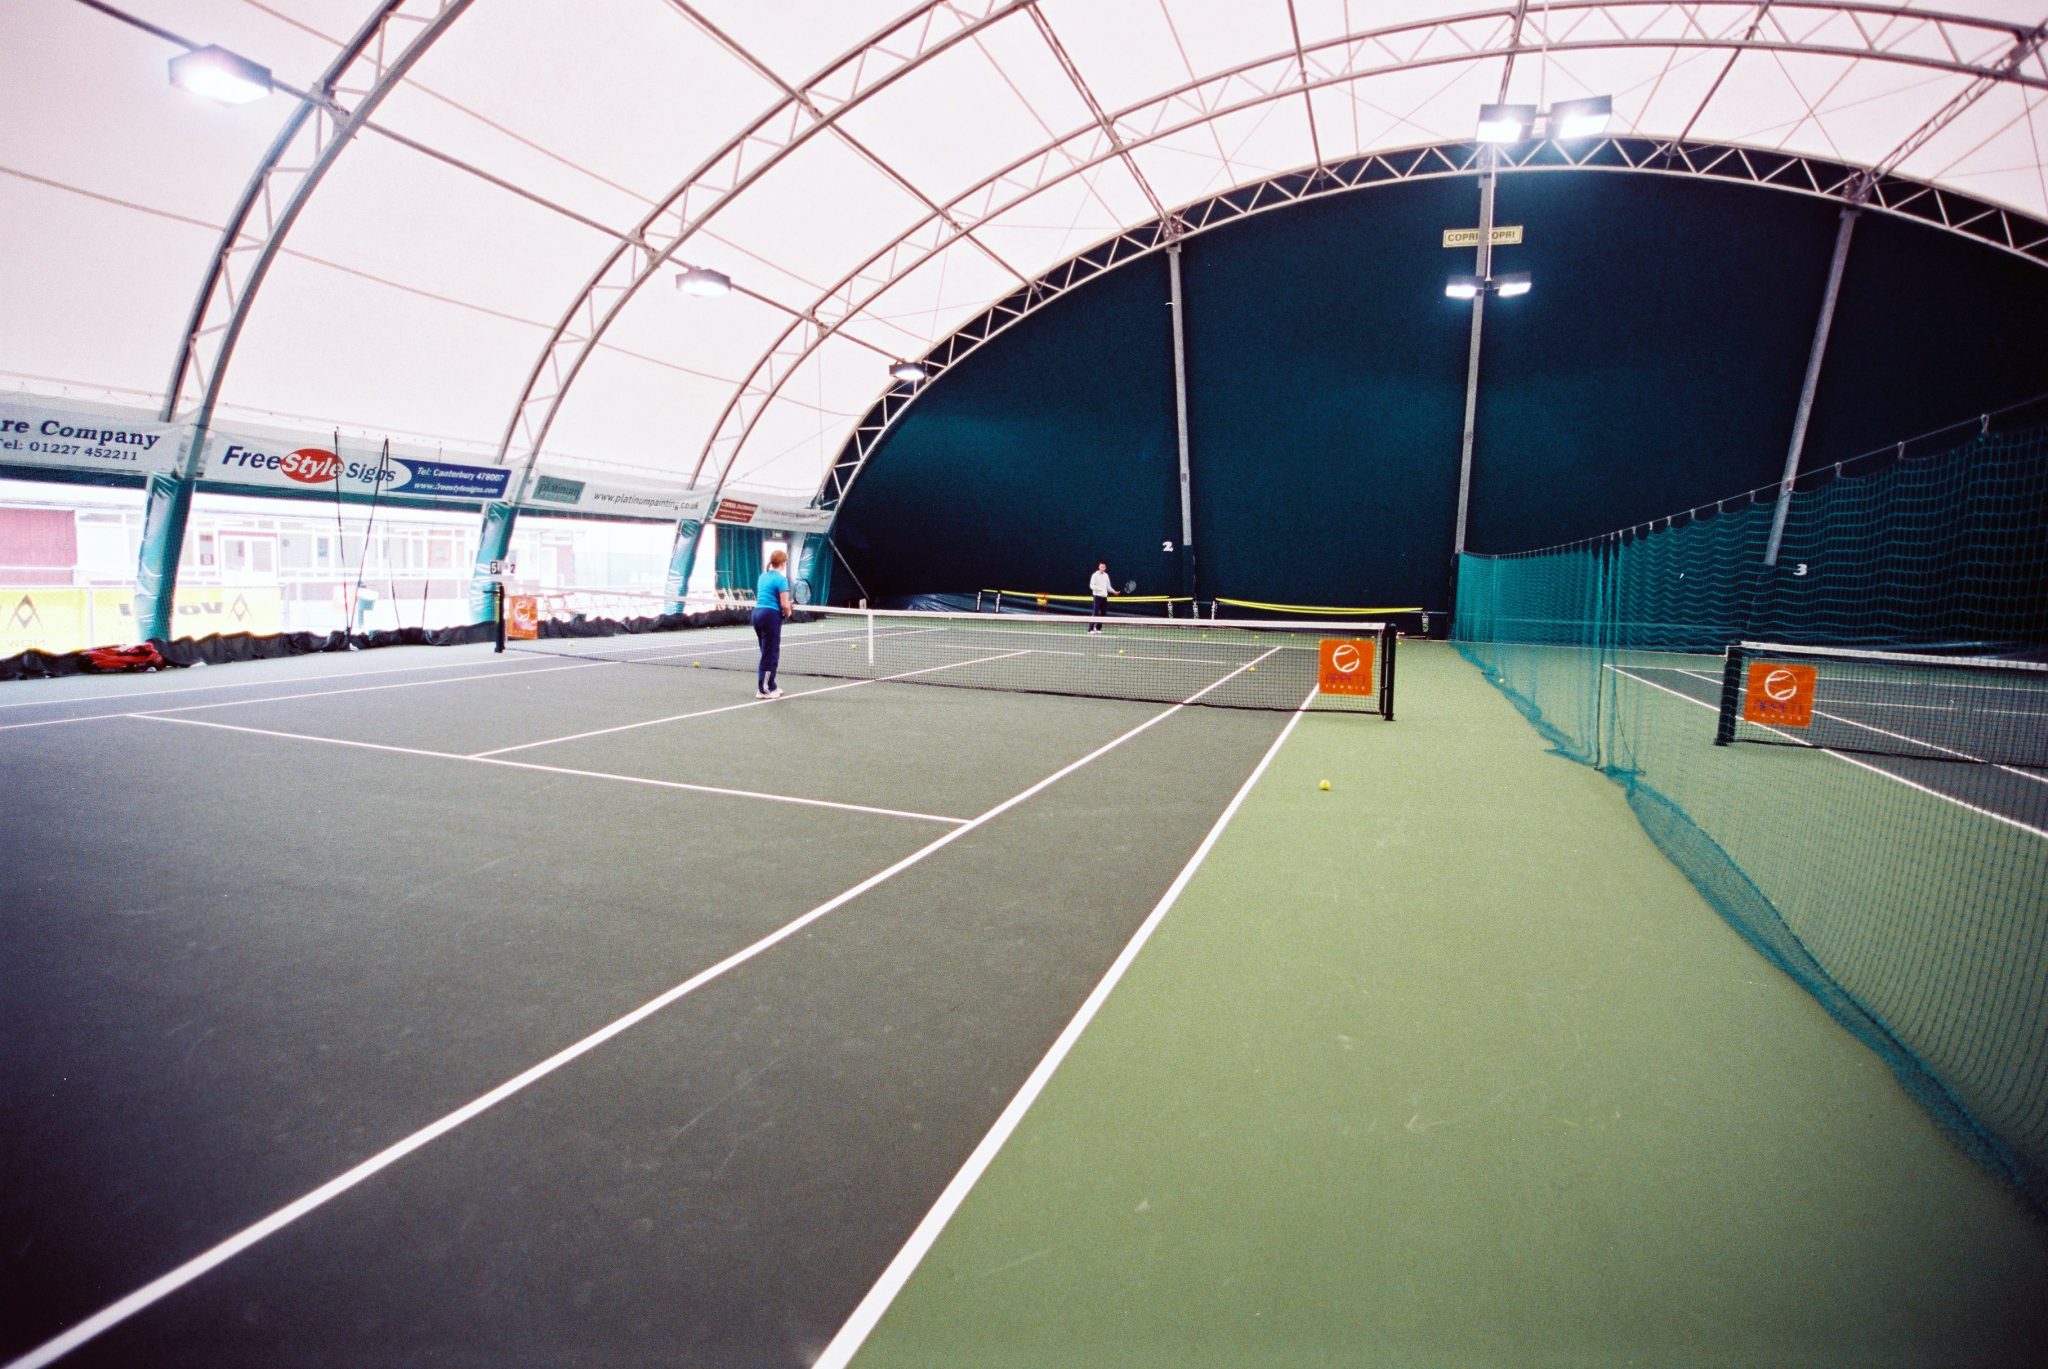 One of our sports structures in Peterborough, UK